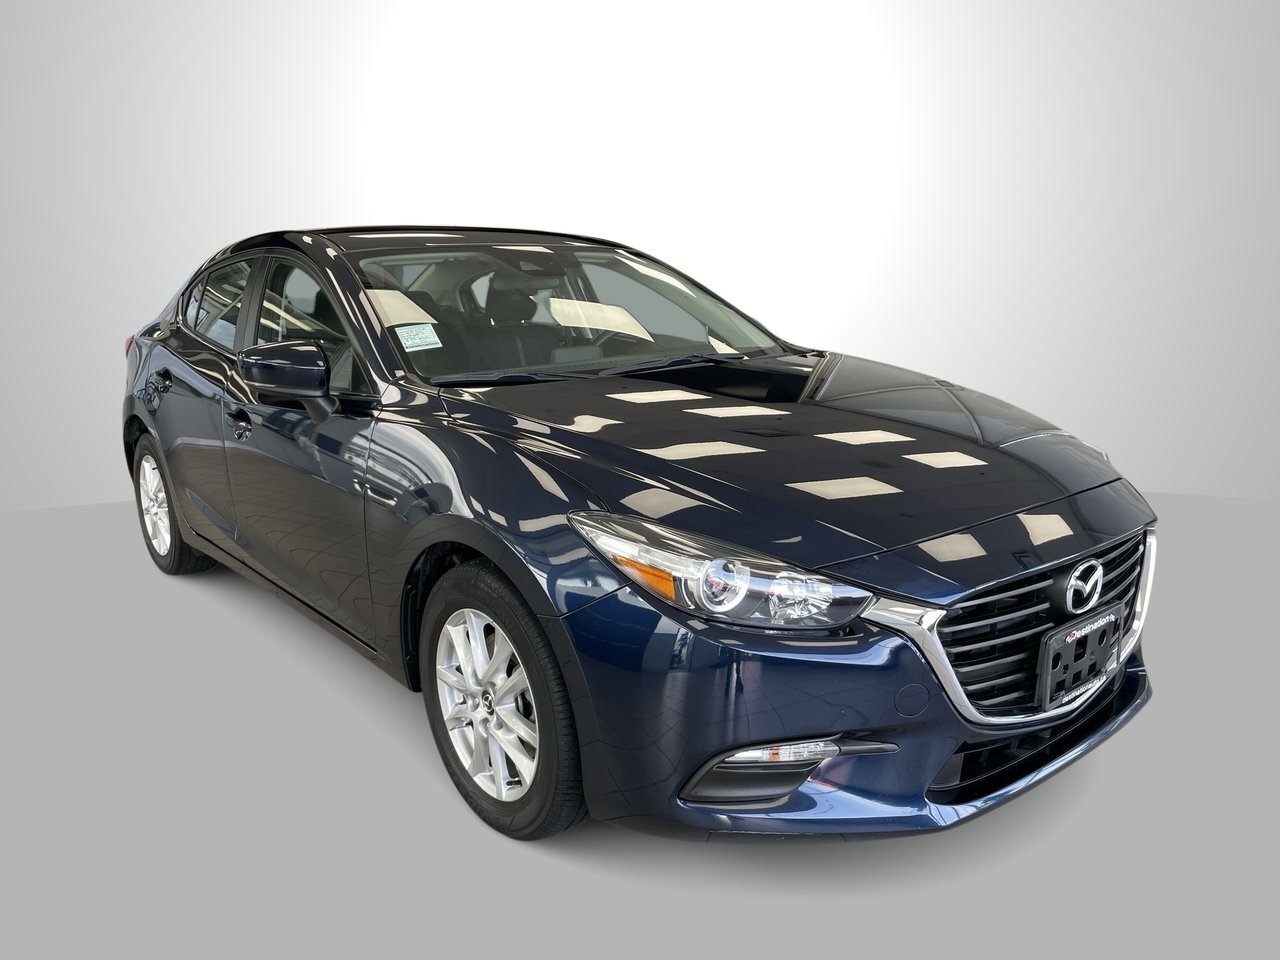 2017 Mazda Mazda3 GS | Local | with Navigation | Best Price First! 